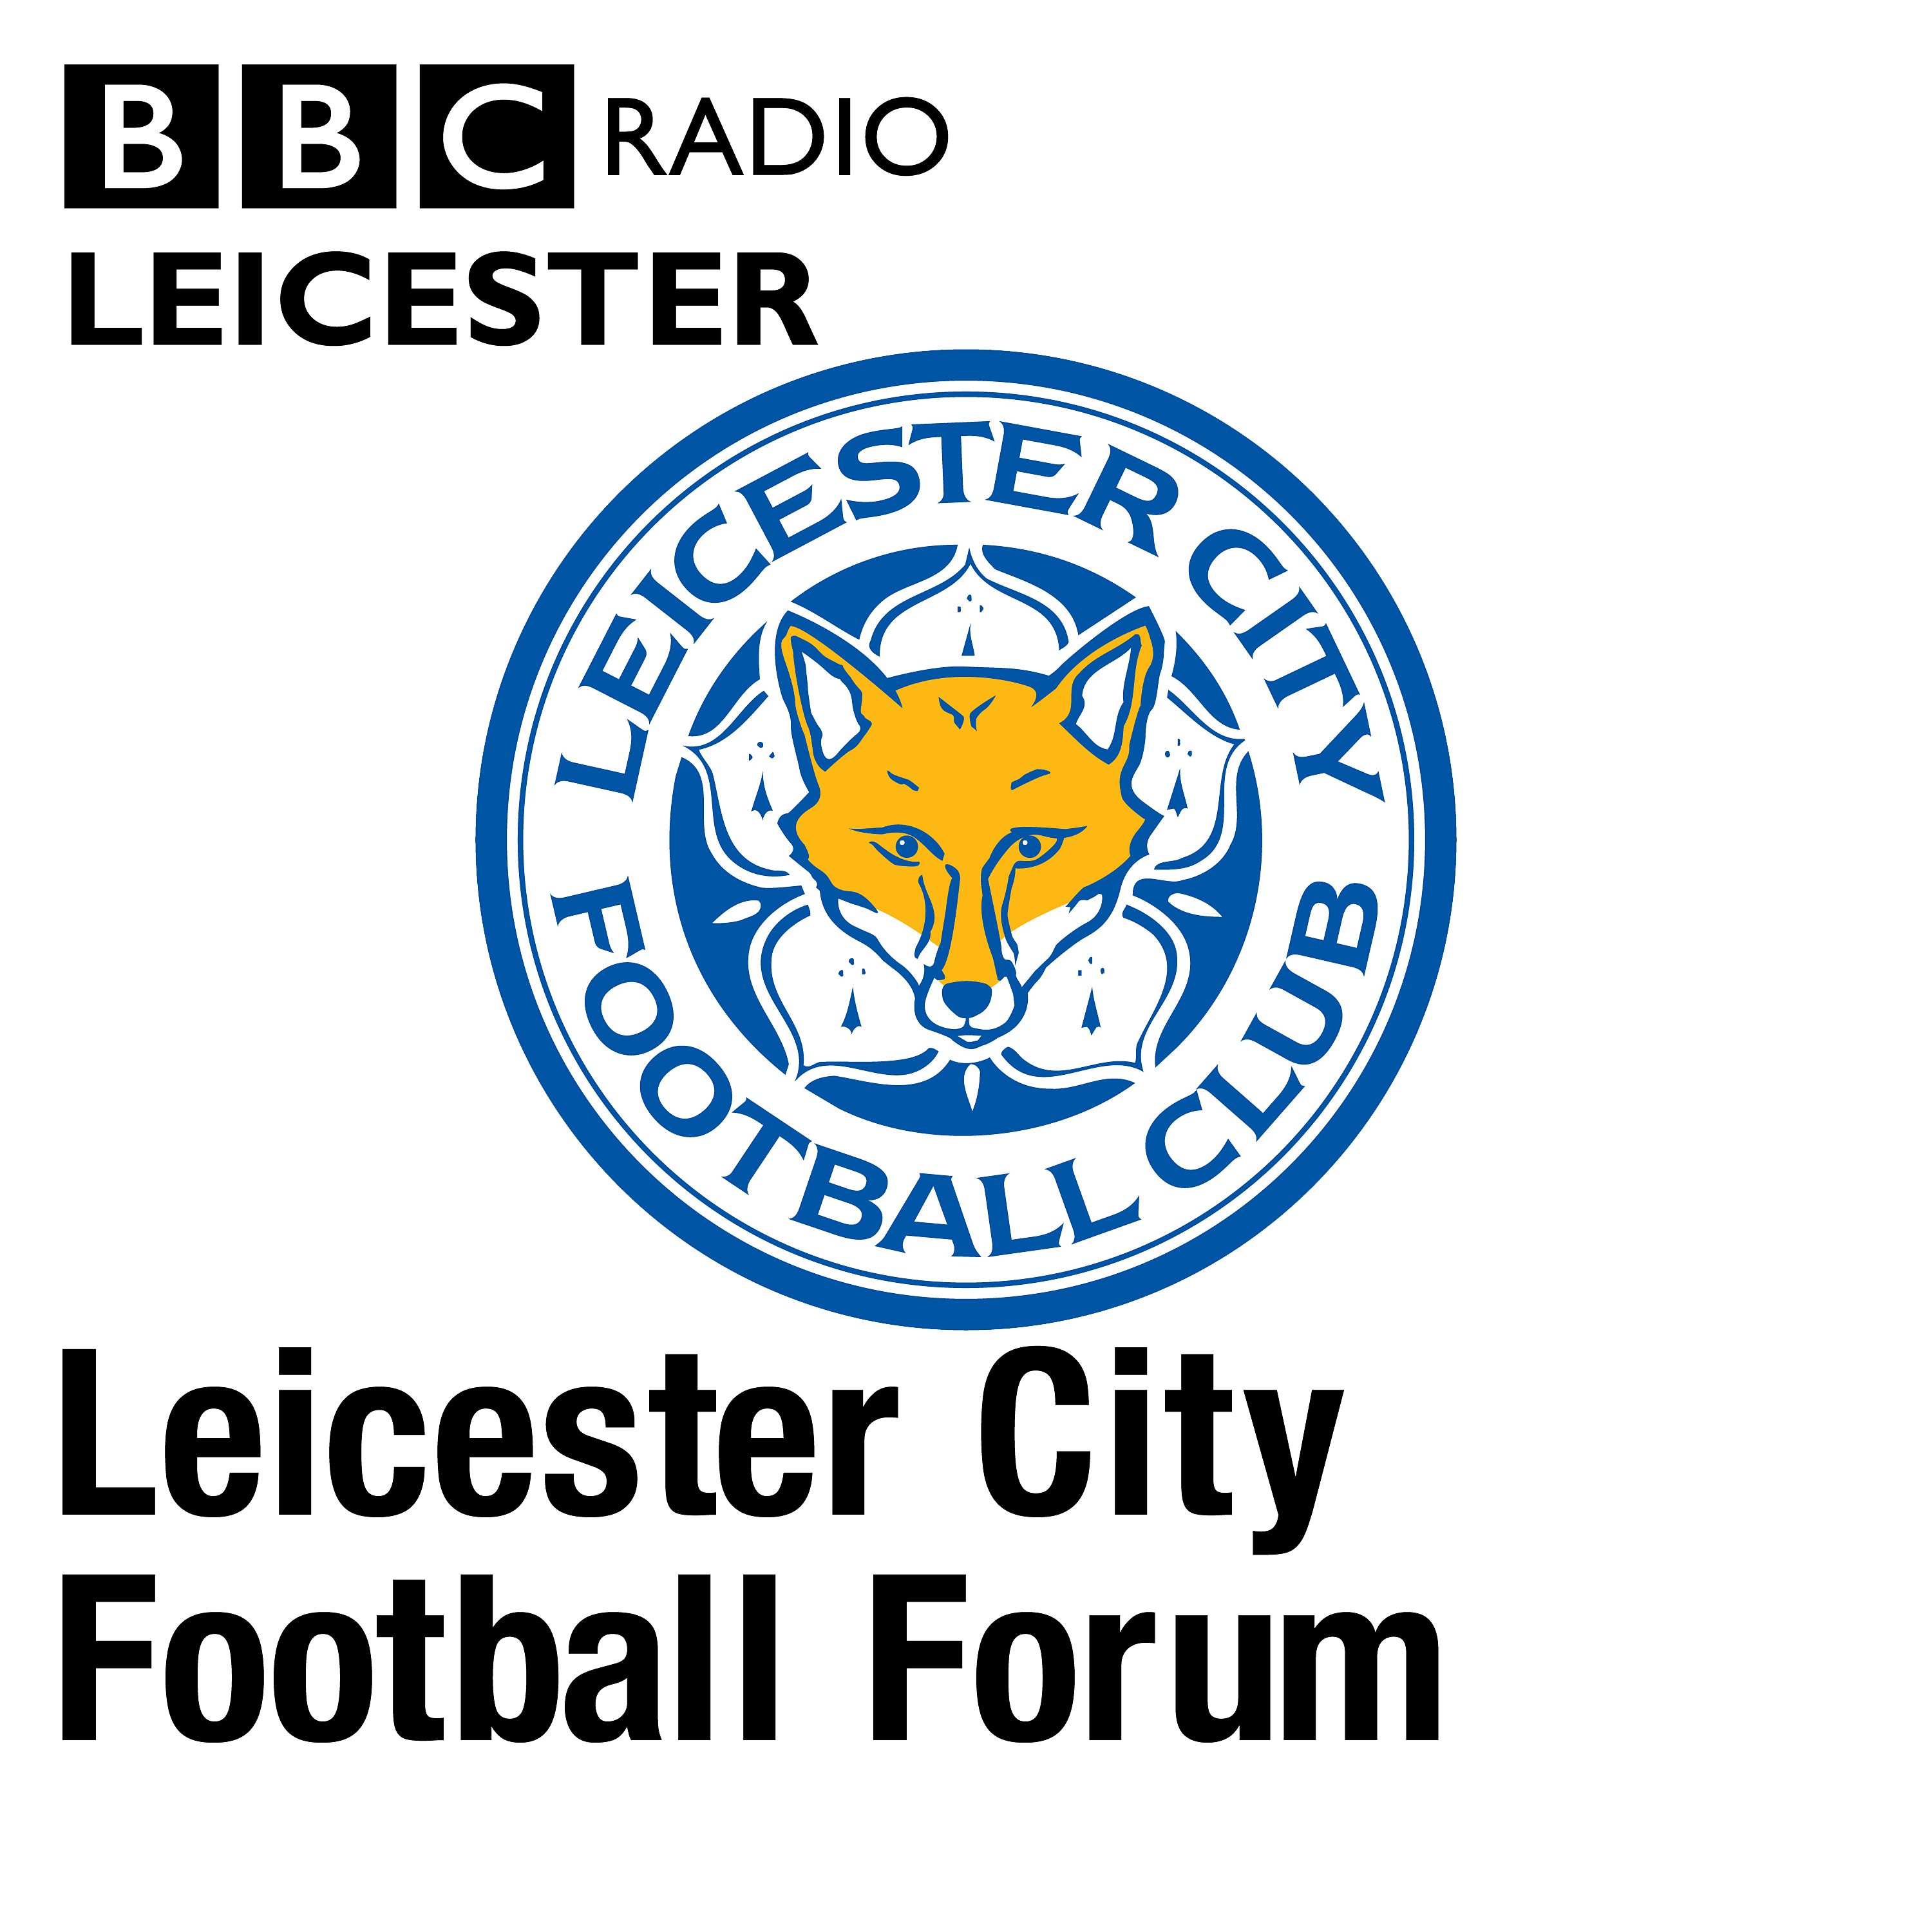 Leicester’s FA Cup Defeat: “They Weren’t Bothered”